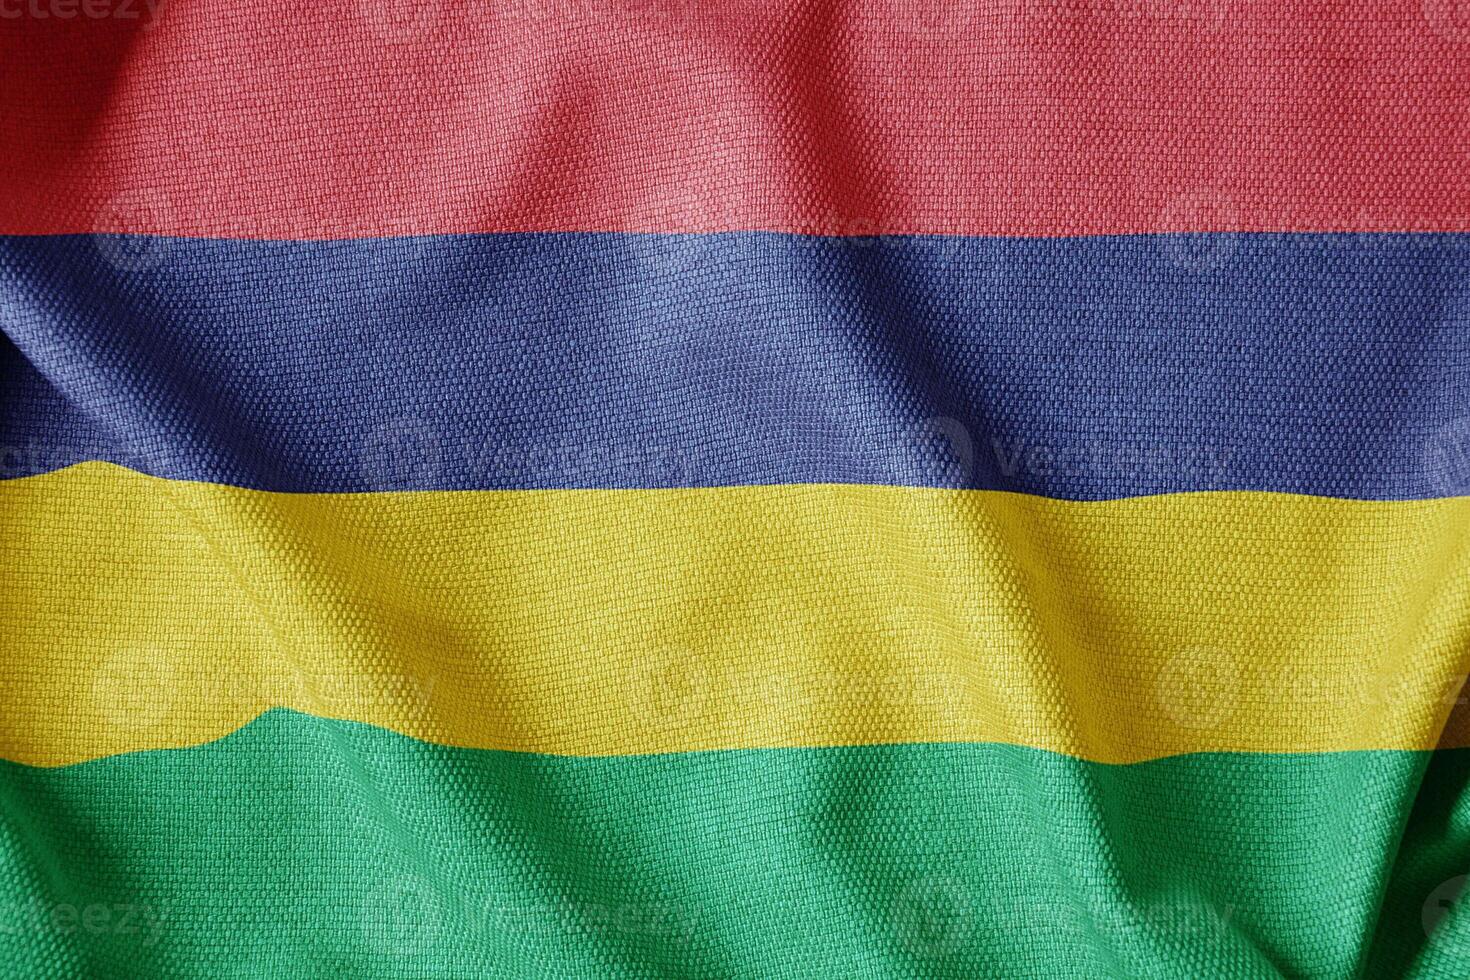 National flag of Mauritius flutters in the wind. Wavy Flag. Close-up front view photo